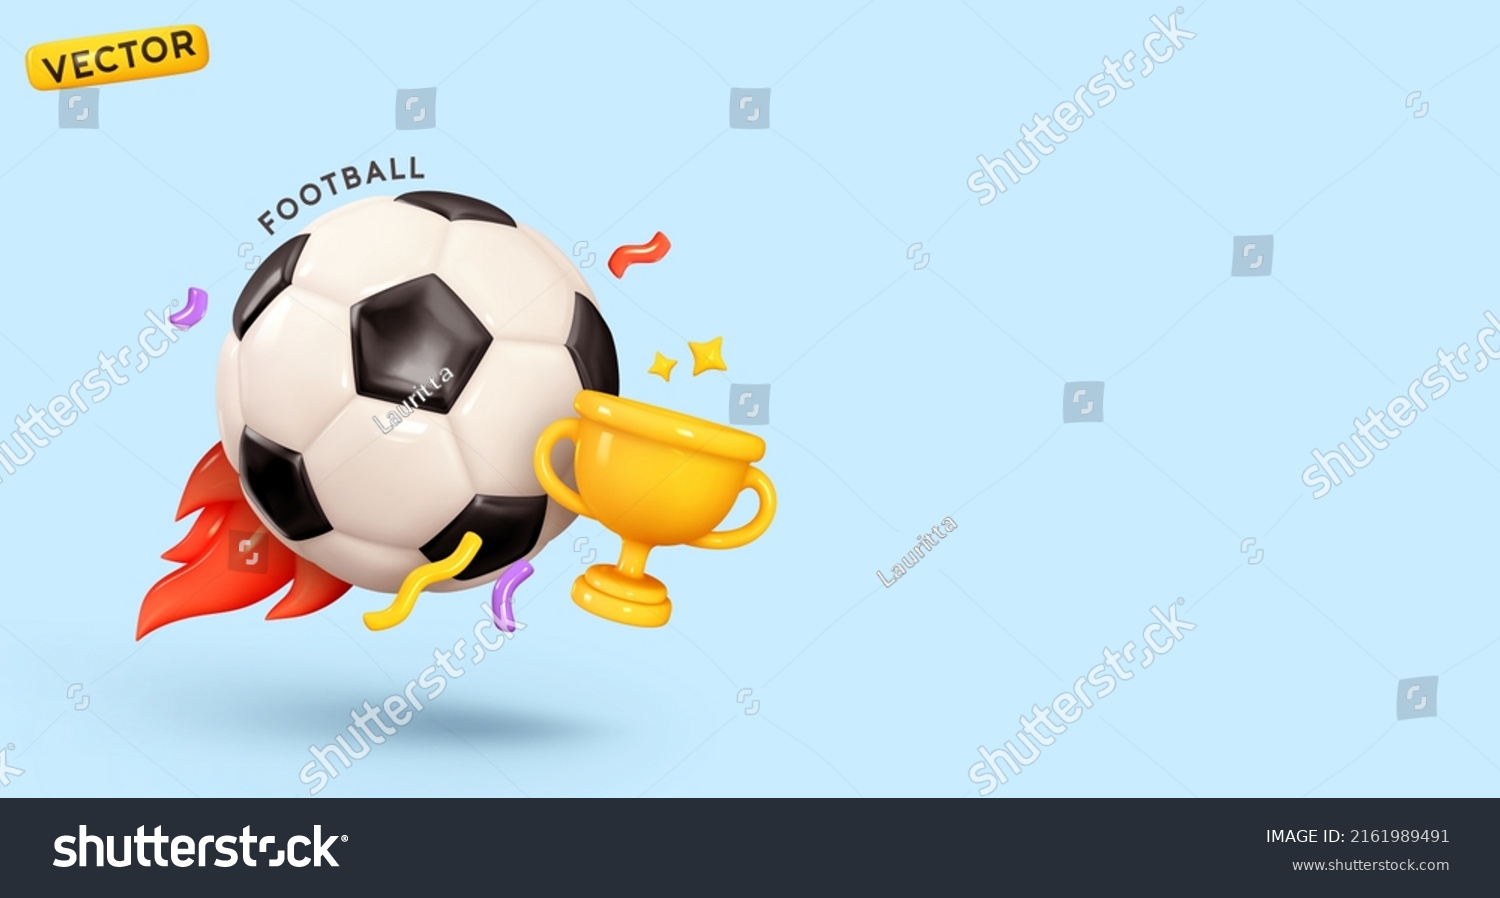 Soccer ball with golden cup. Creative concept background with sports attributes design elements. Realistic 3d object cartoon style. Sports football game. vector illustration #2161989491